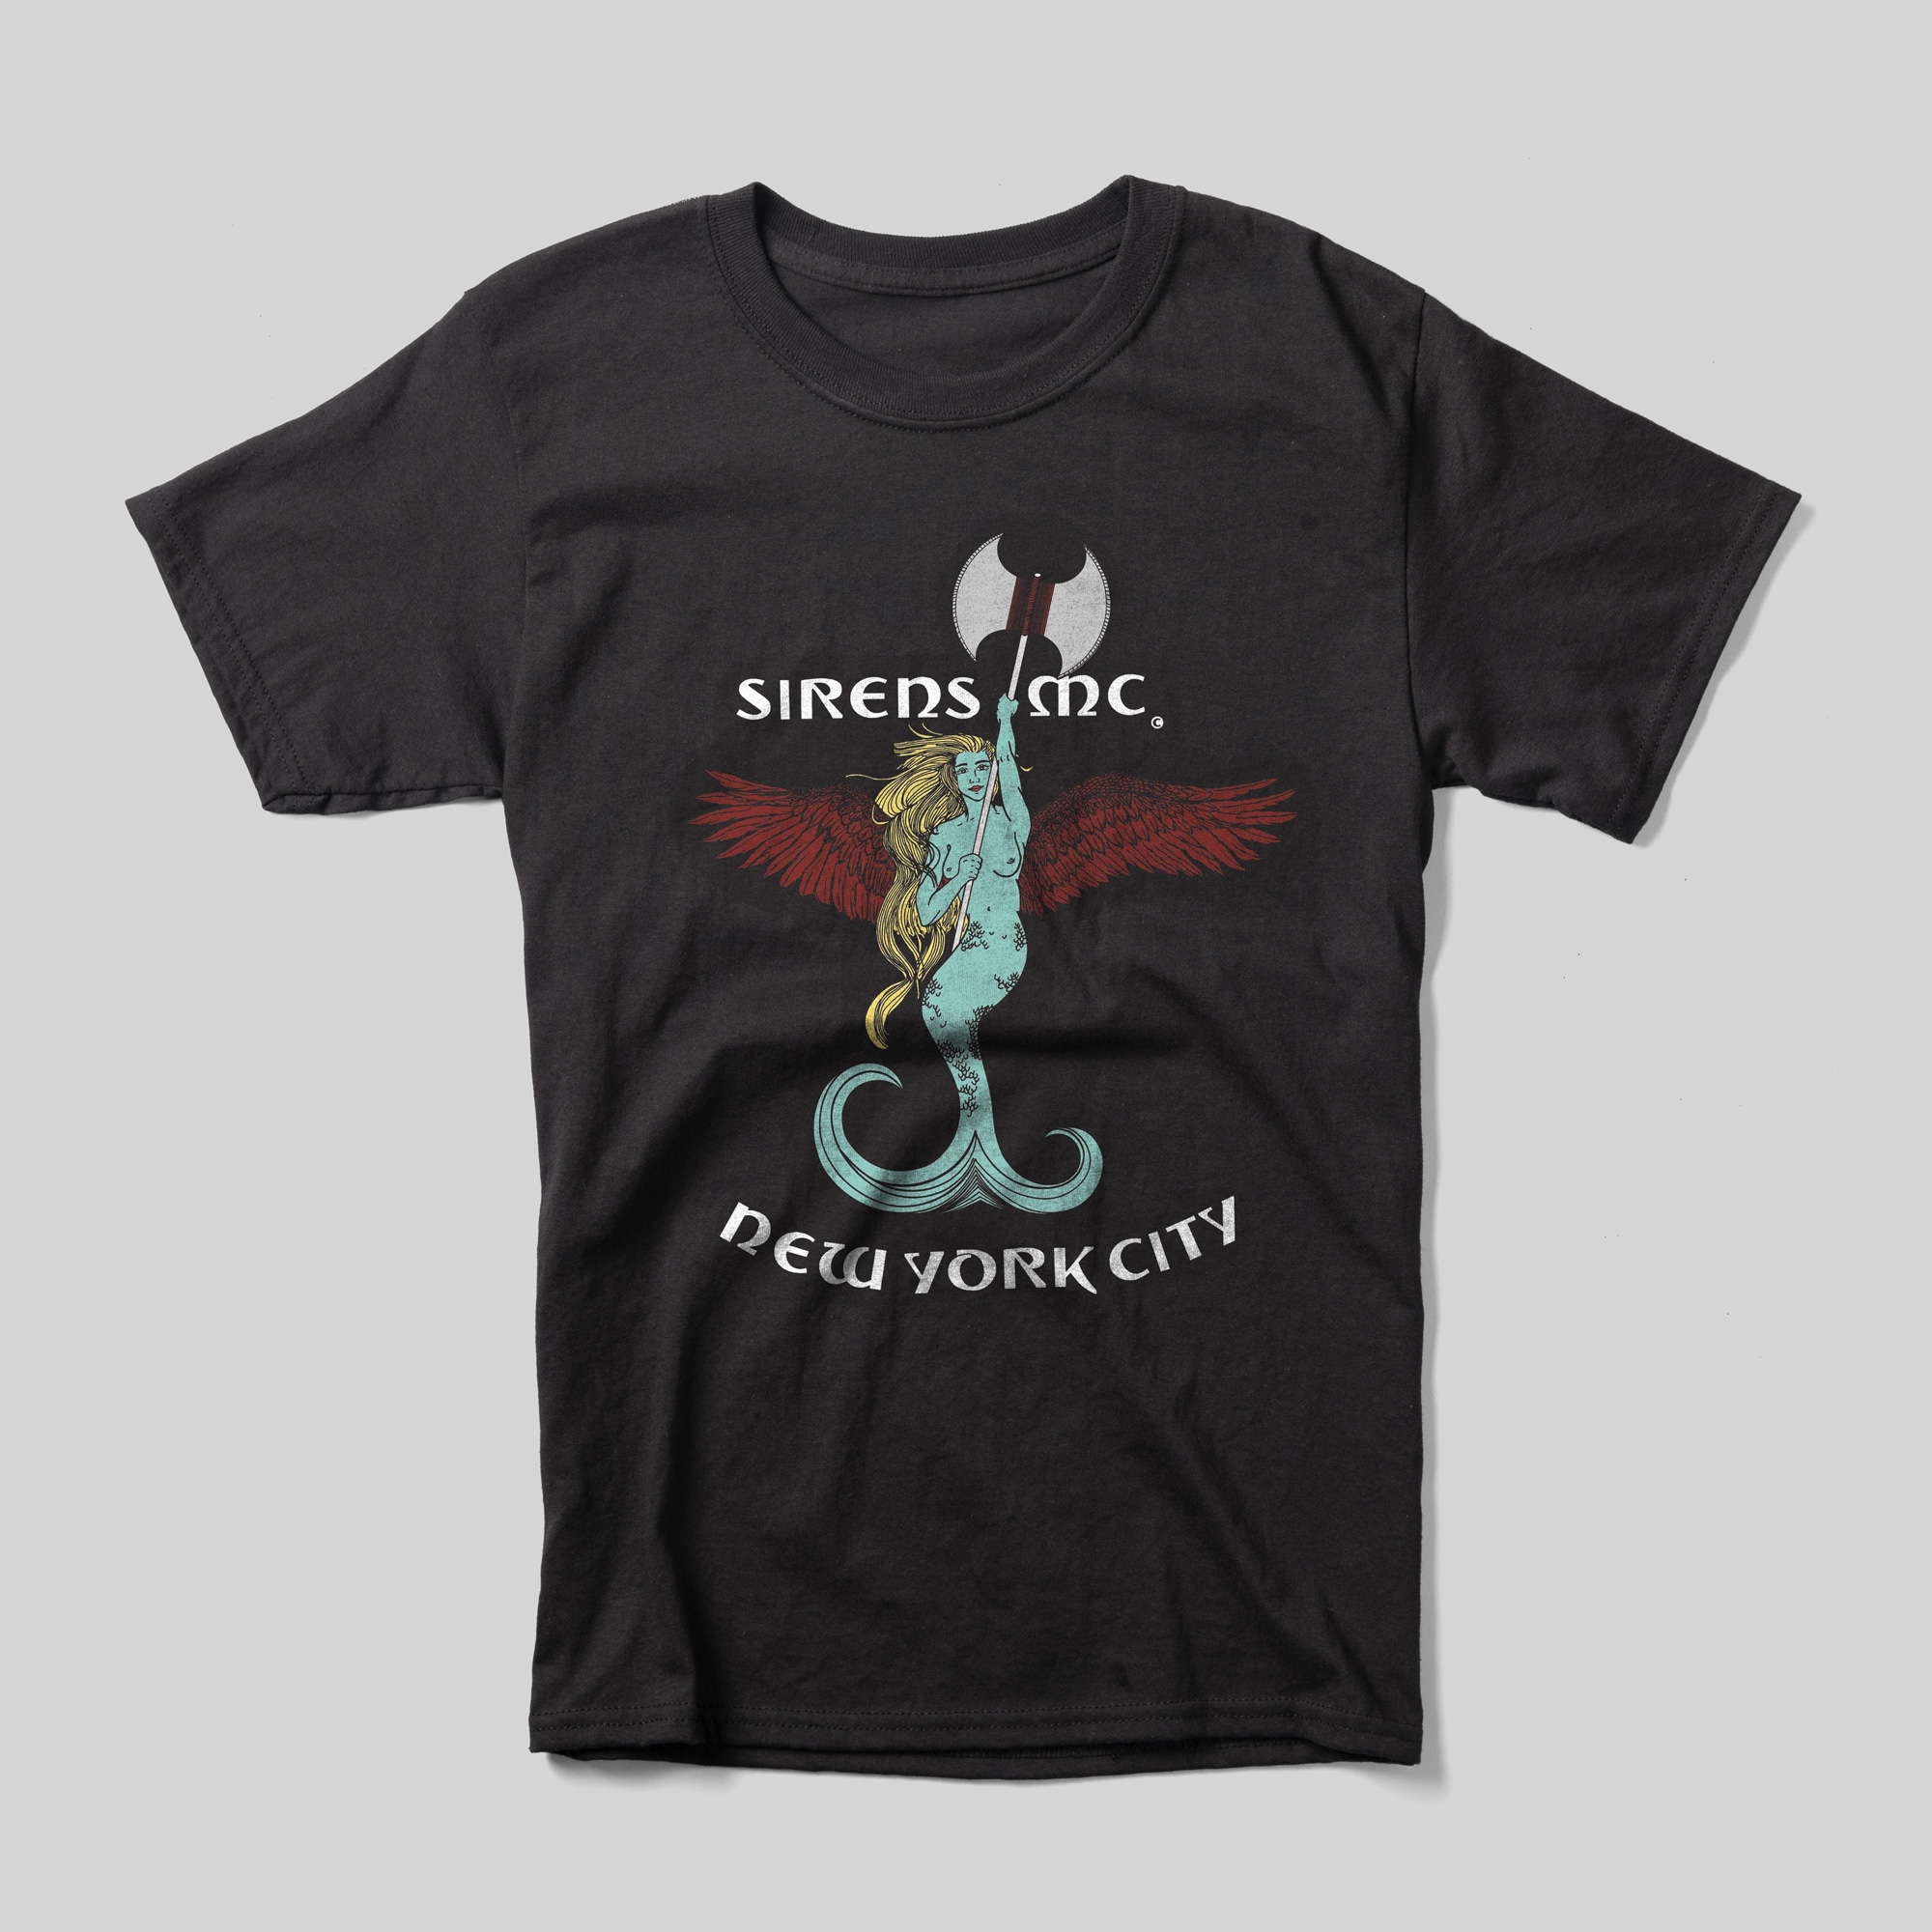 A black t-shirt that reads "Sirens MC New York City" with an illustration of a siren (a mythological creature who is half-bird and half-woman) holding a labrys.